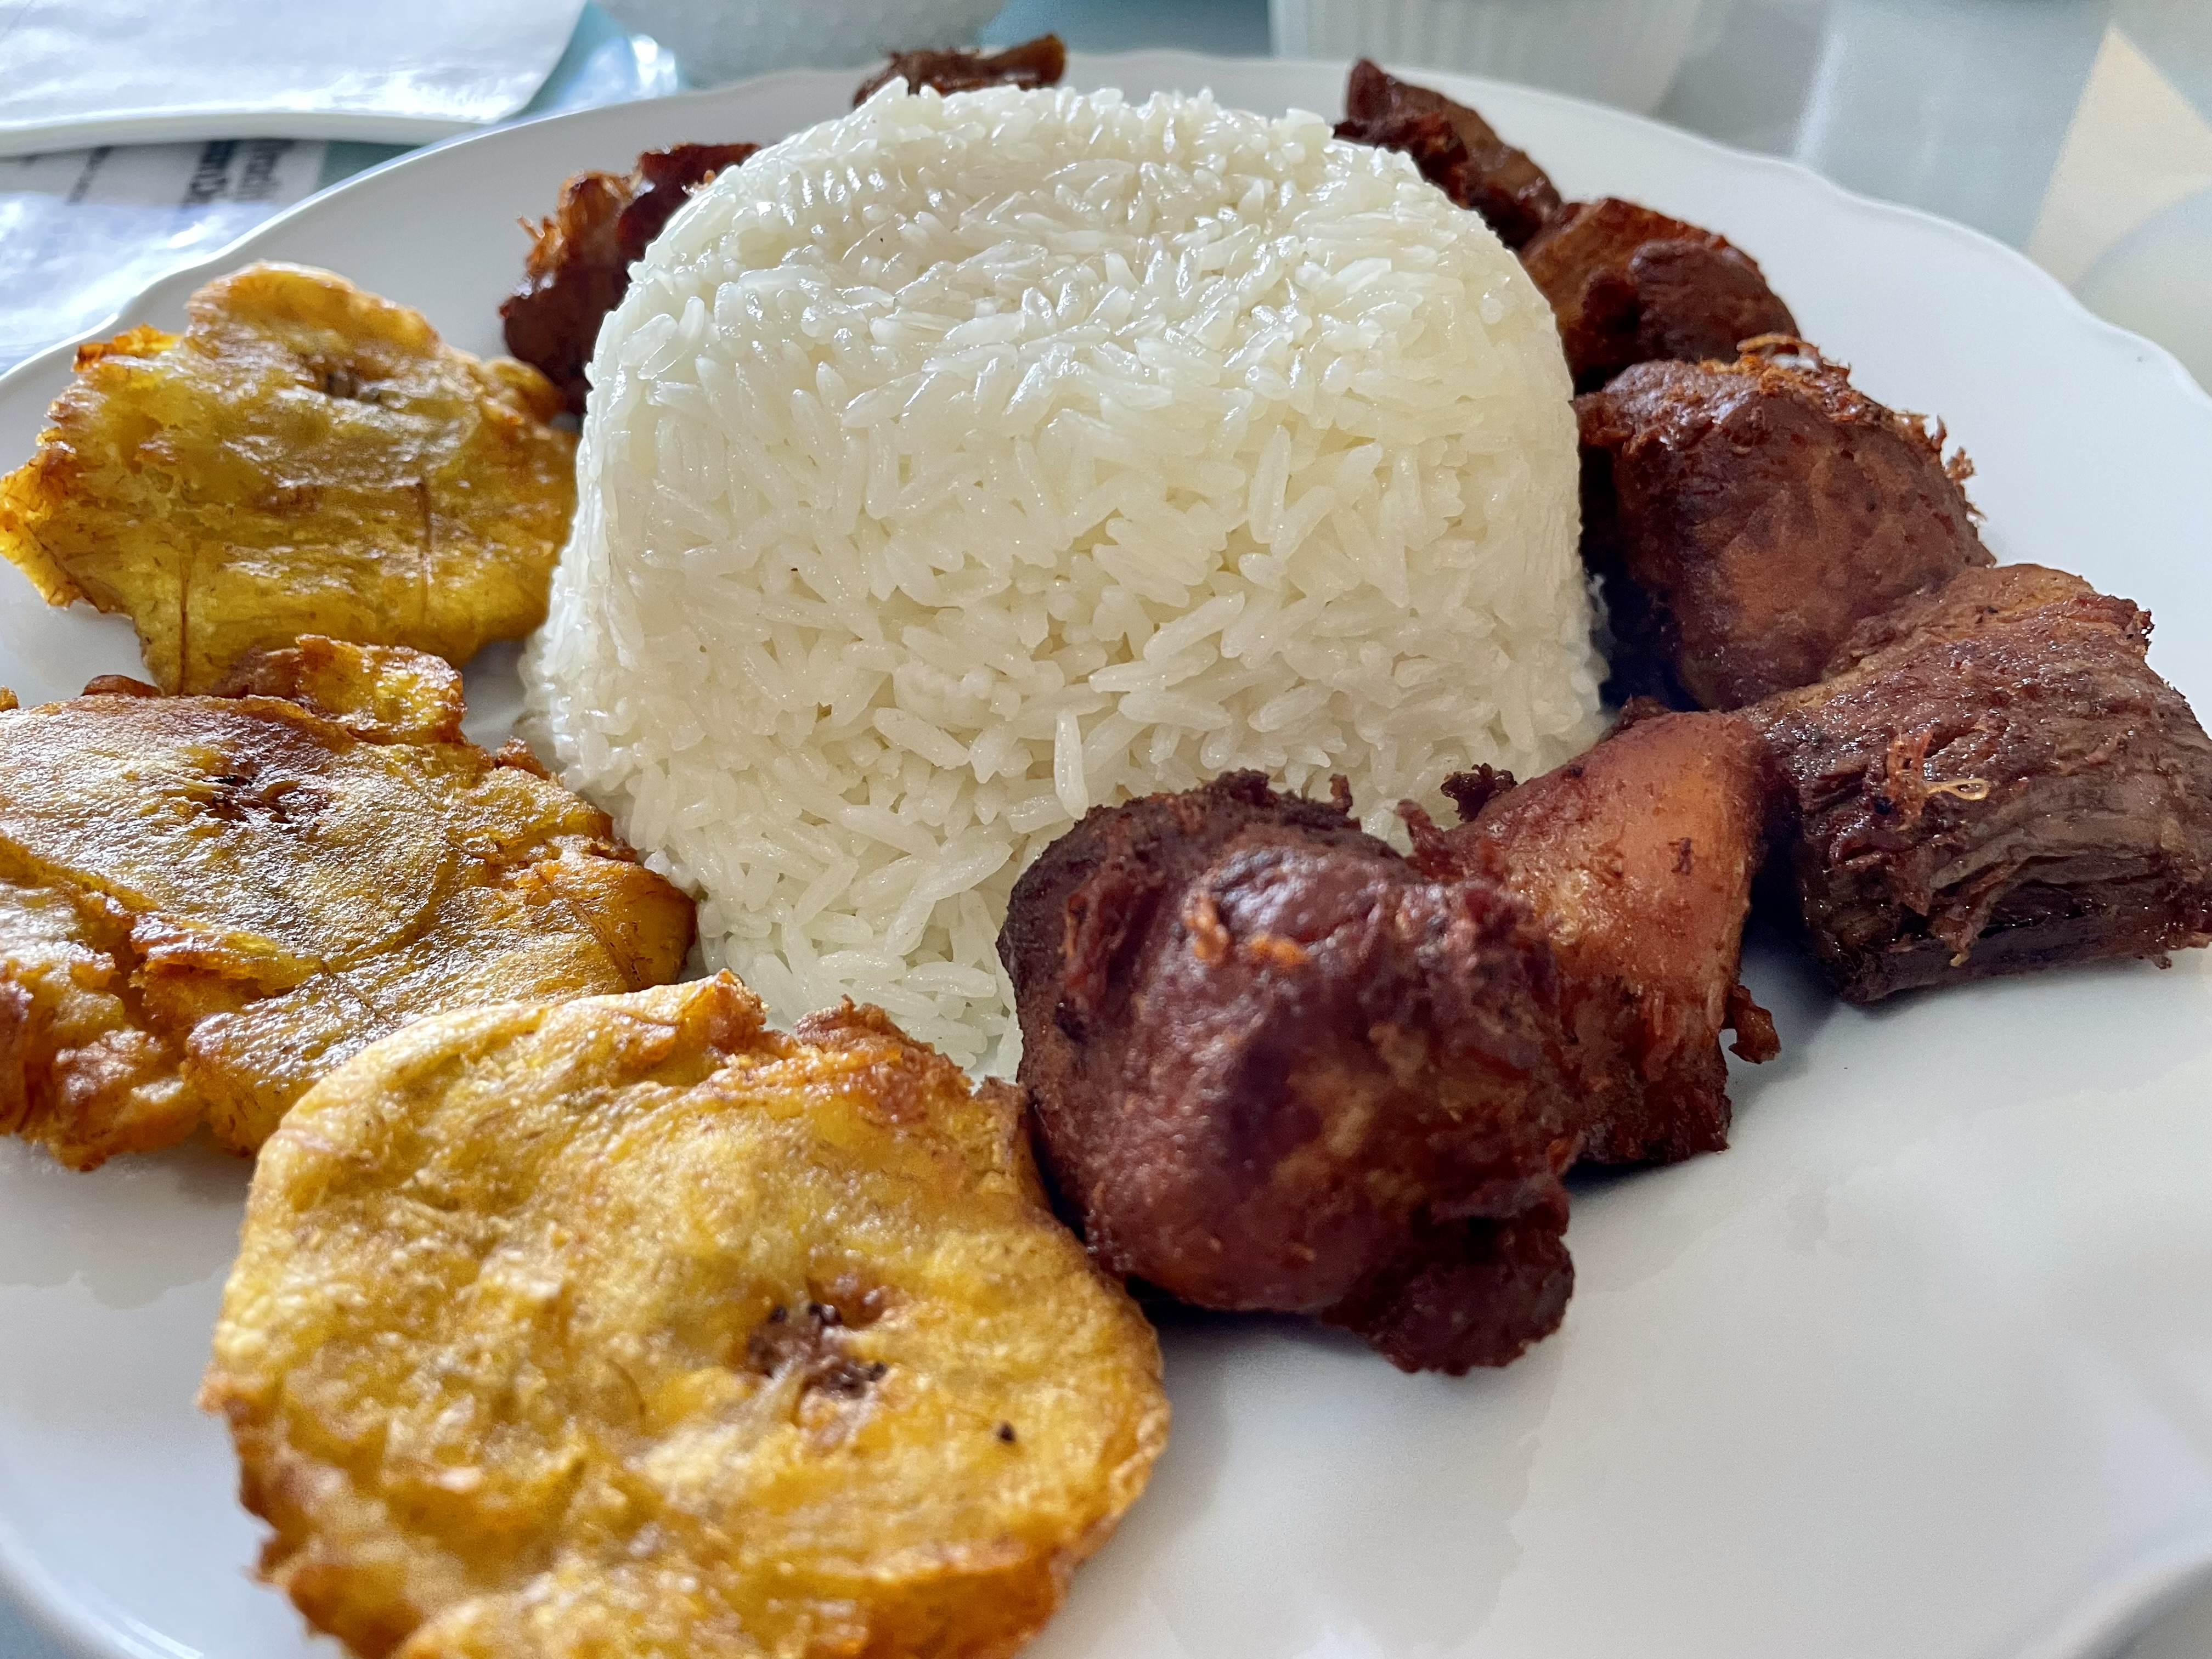 Griot along with diri ak pwa wouj (red beans and rice) is considered by some to be Haiti's national dish